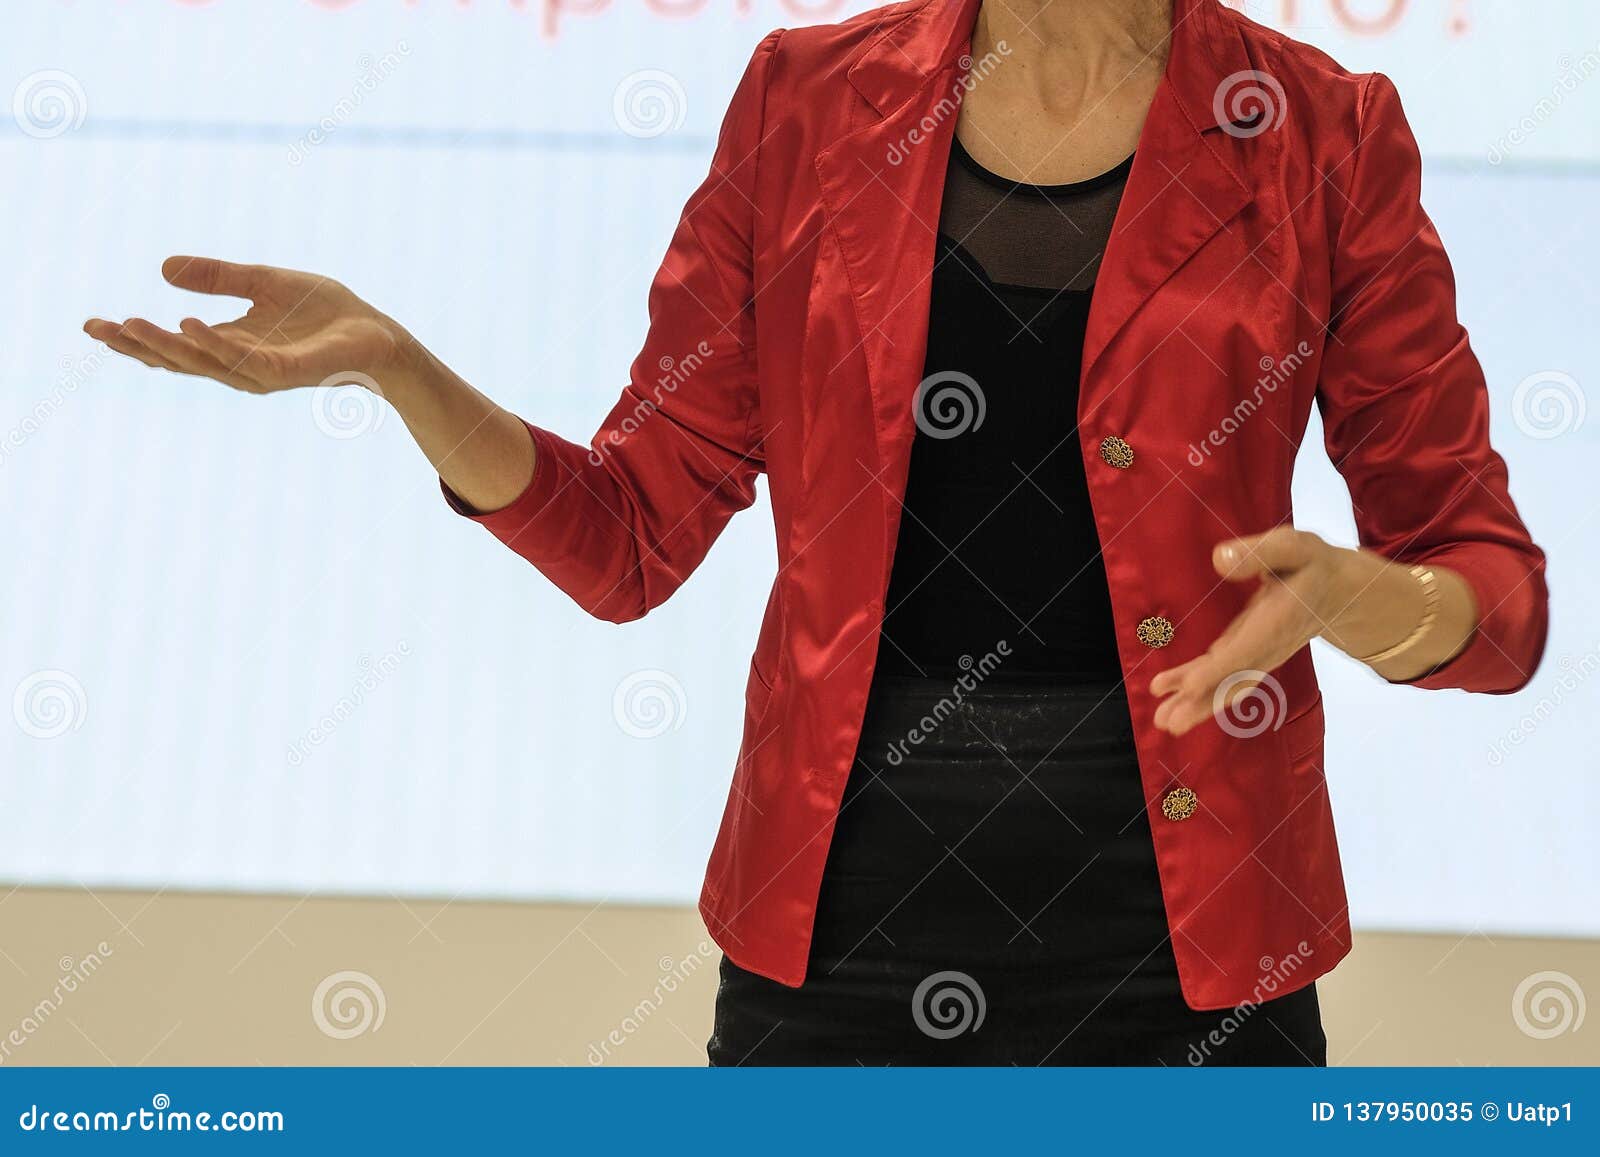 speaker woman at a conference